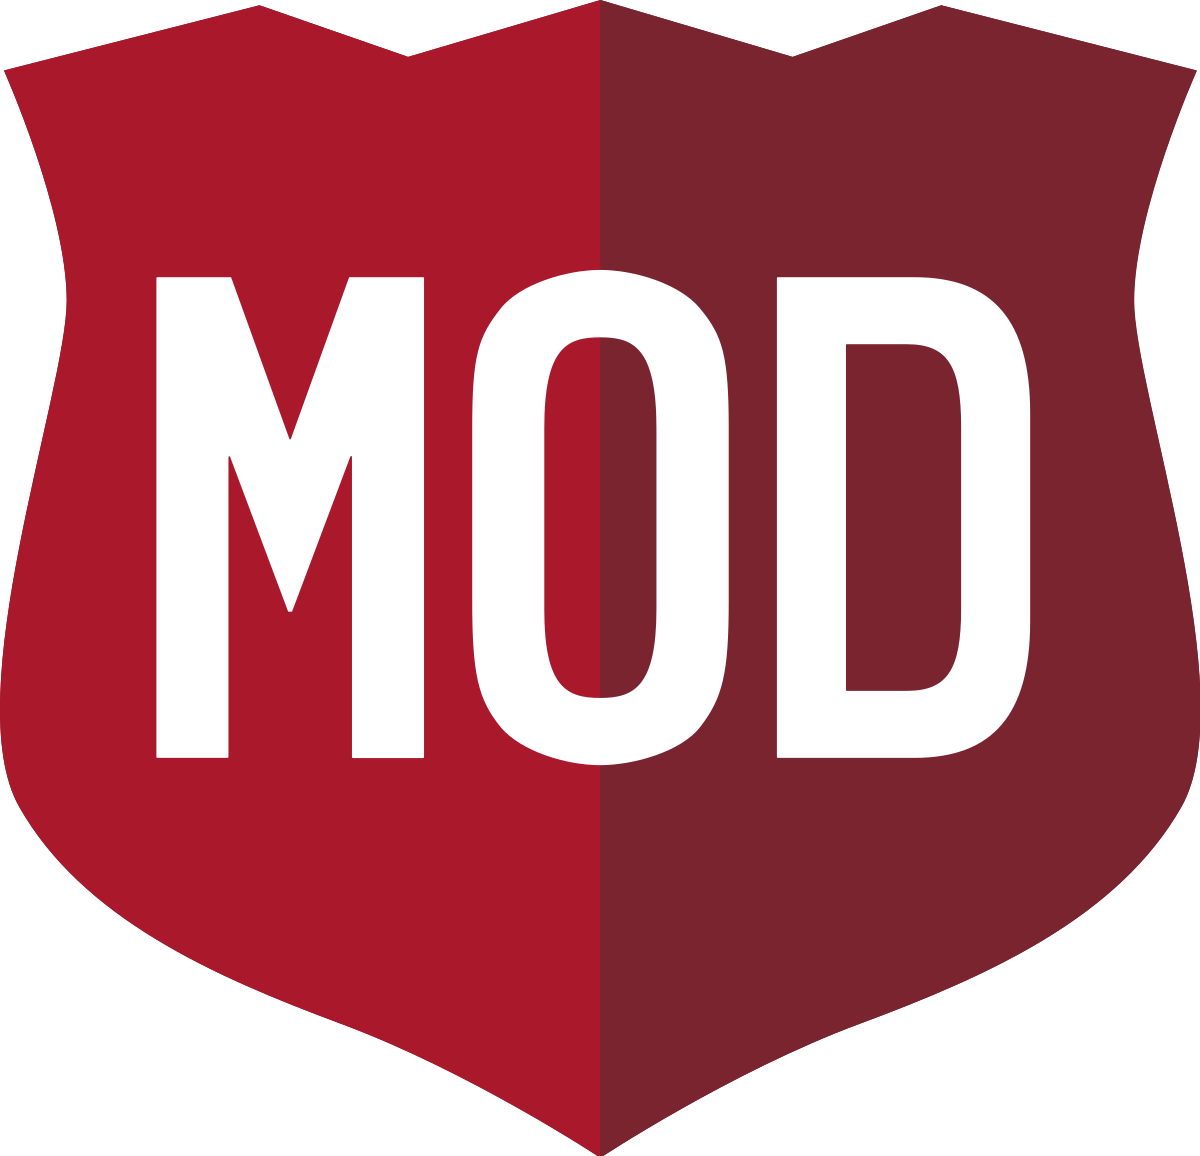 Since its founding, MOD has maintained a commitment to be a force for positive social impact by doing what it does best – employing and feeding people